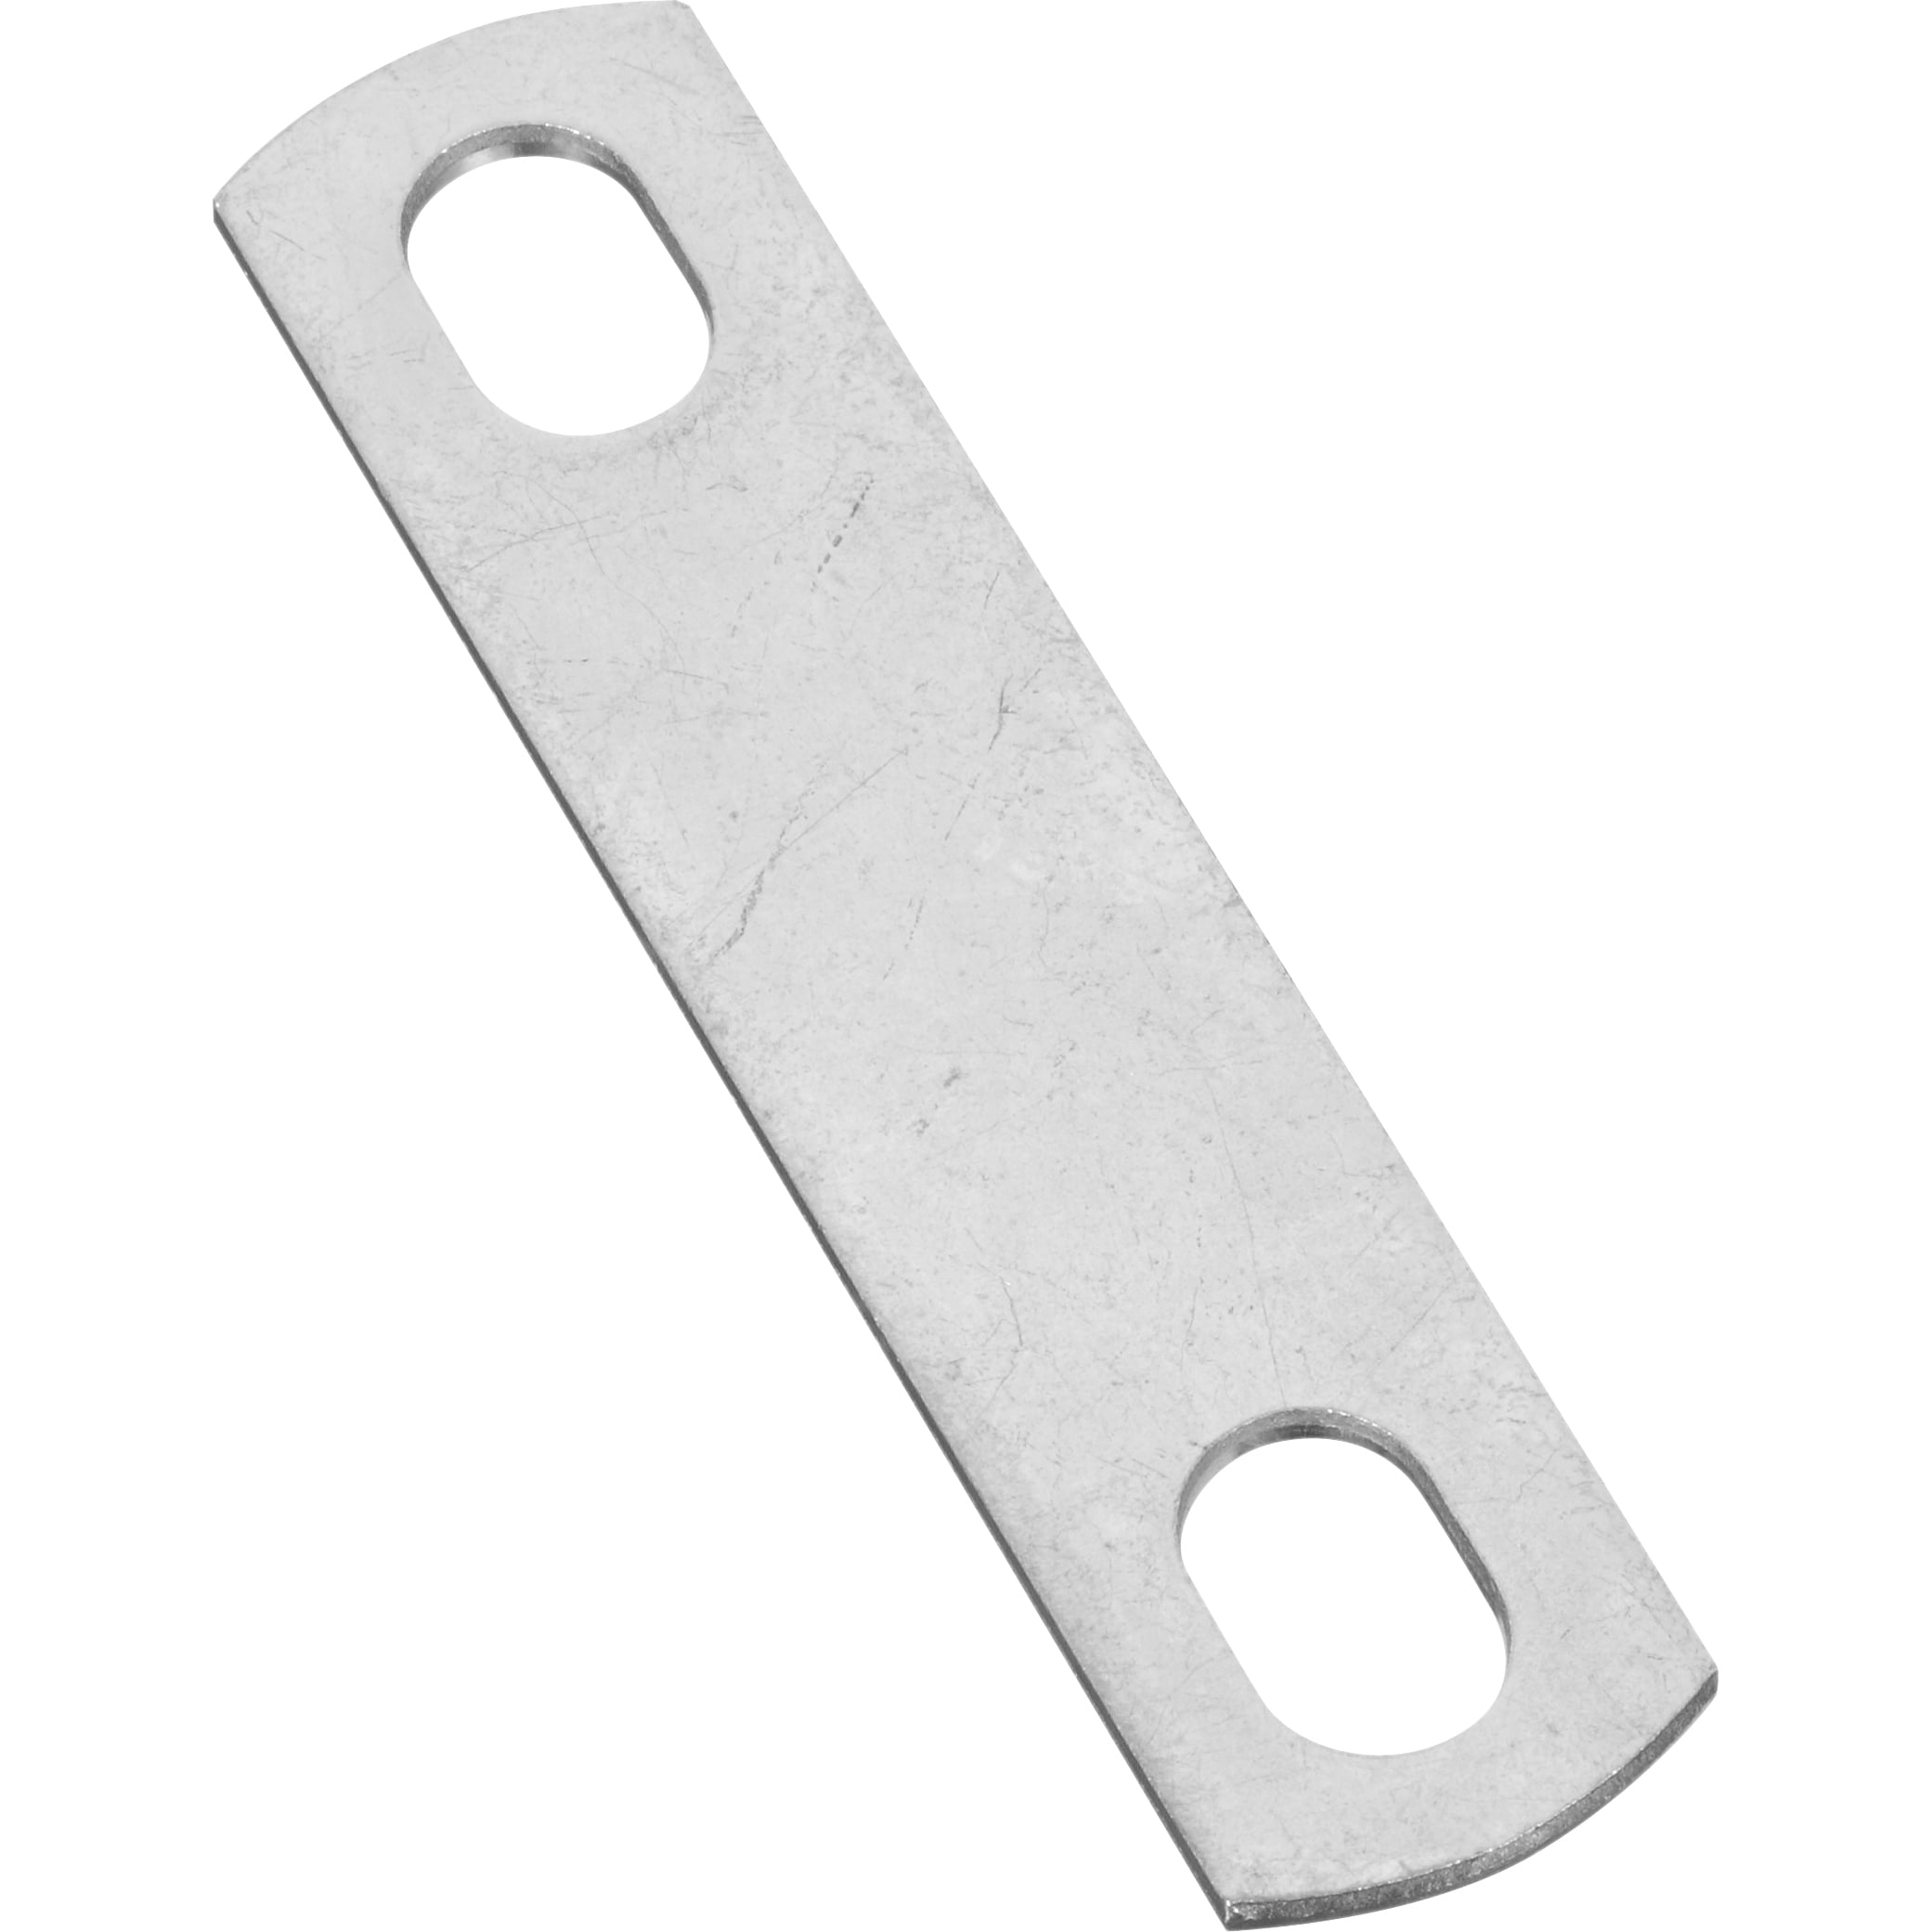 5707377 0.83 X 2 In. Steel Carded U-bolt Plate Zinc Plated